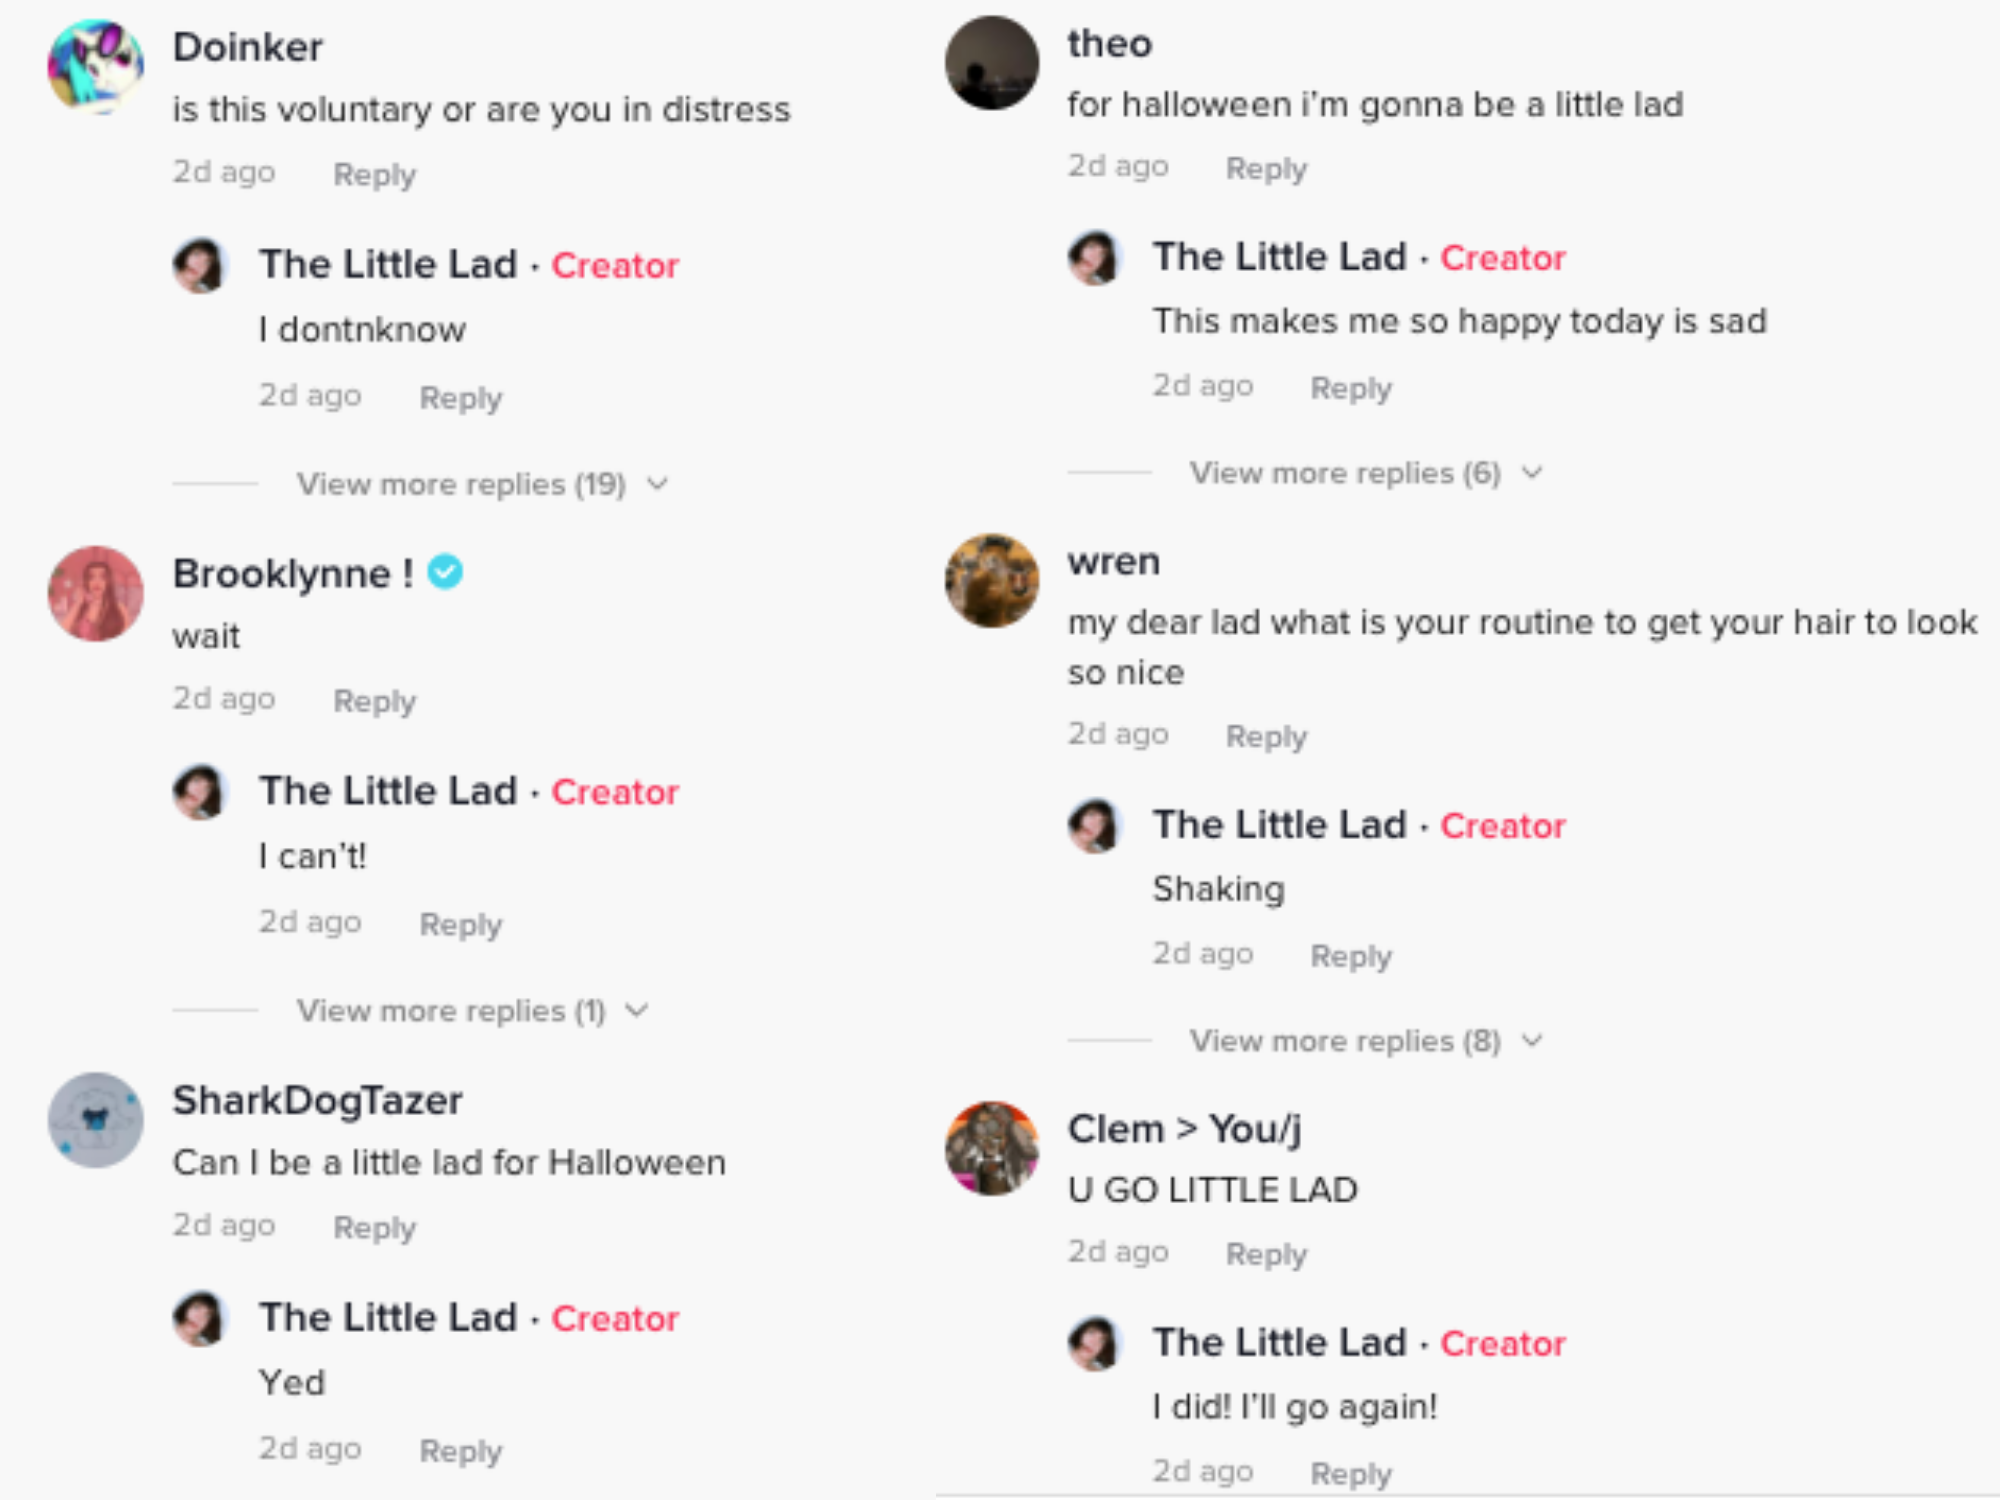 comment replies from the @thereallittlelad TikTok account answering questions about whether the account's actions are voluntary and whether or not people can dress as him for halloween. the comments feature several typos